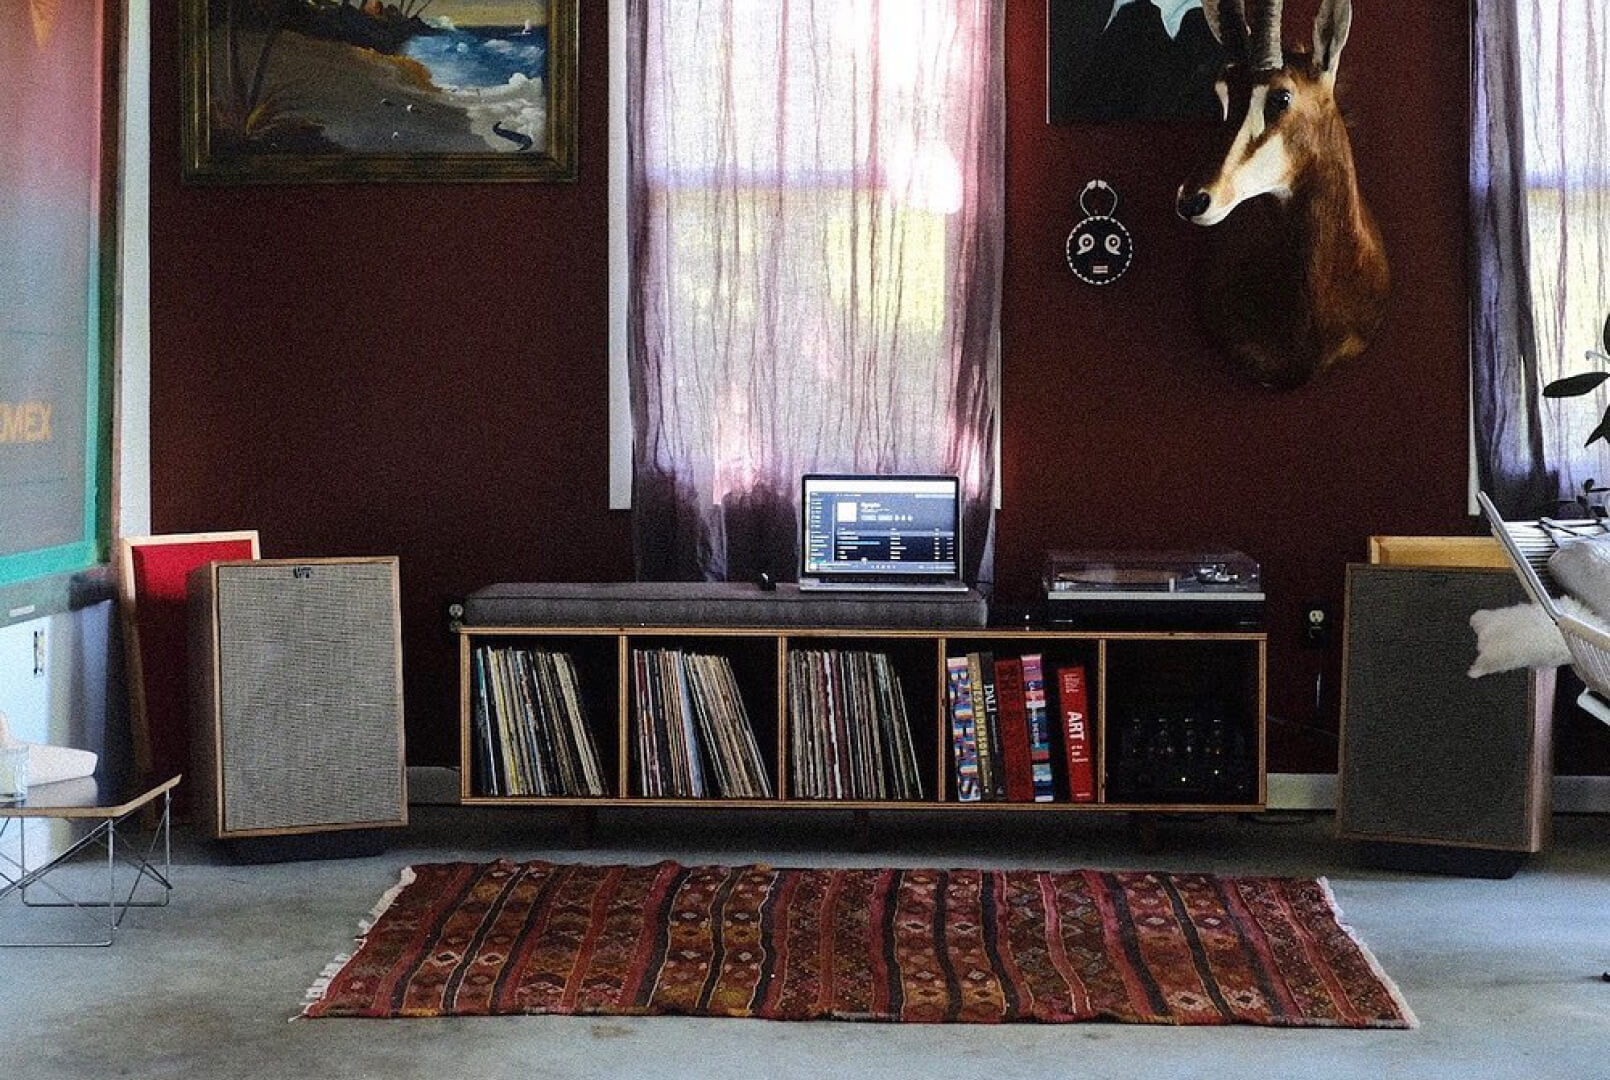 Room with large audio set up (Records, record player, and speakers)